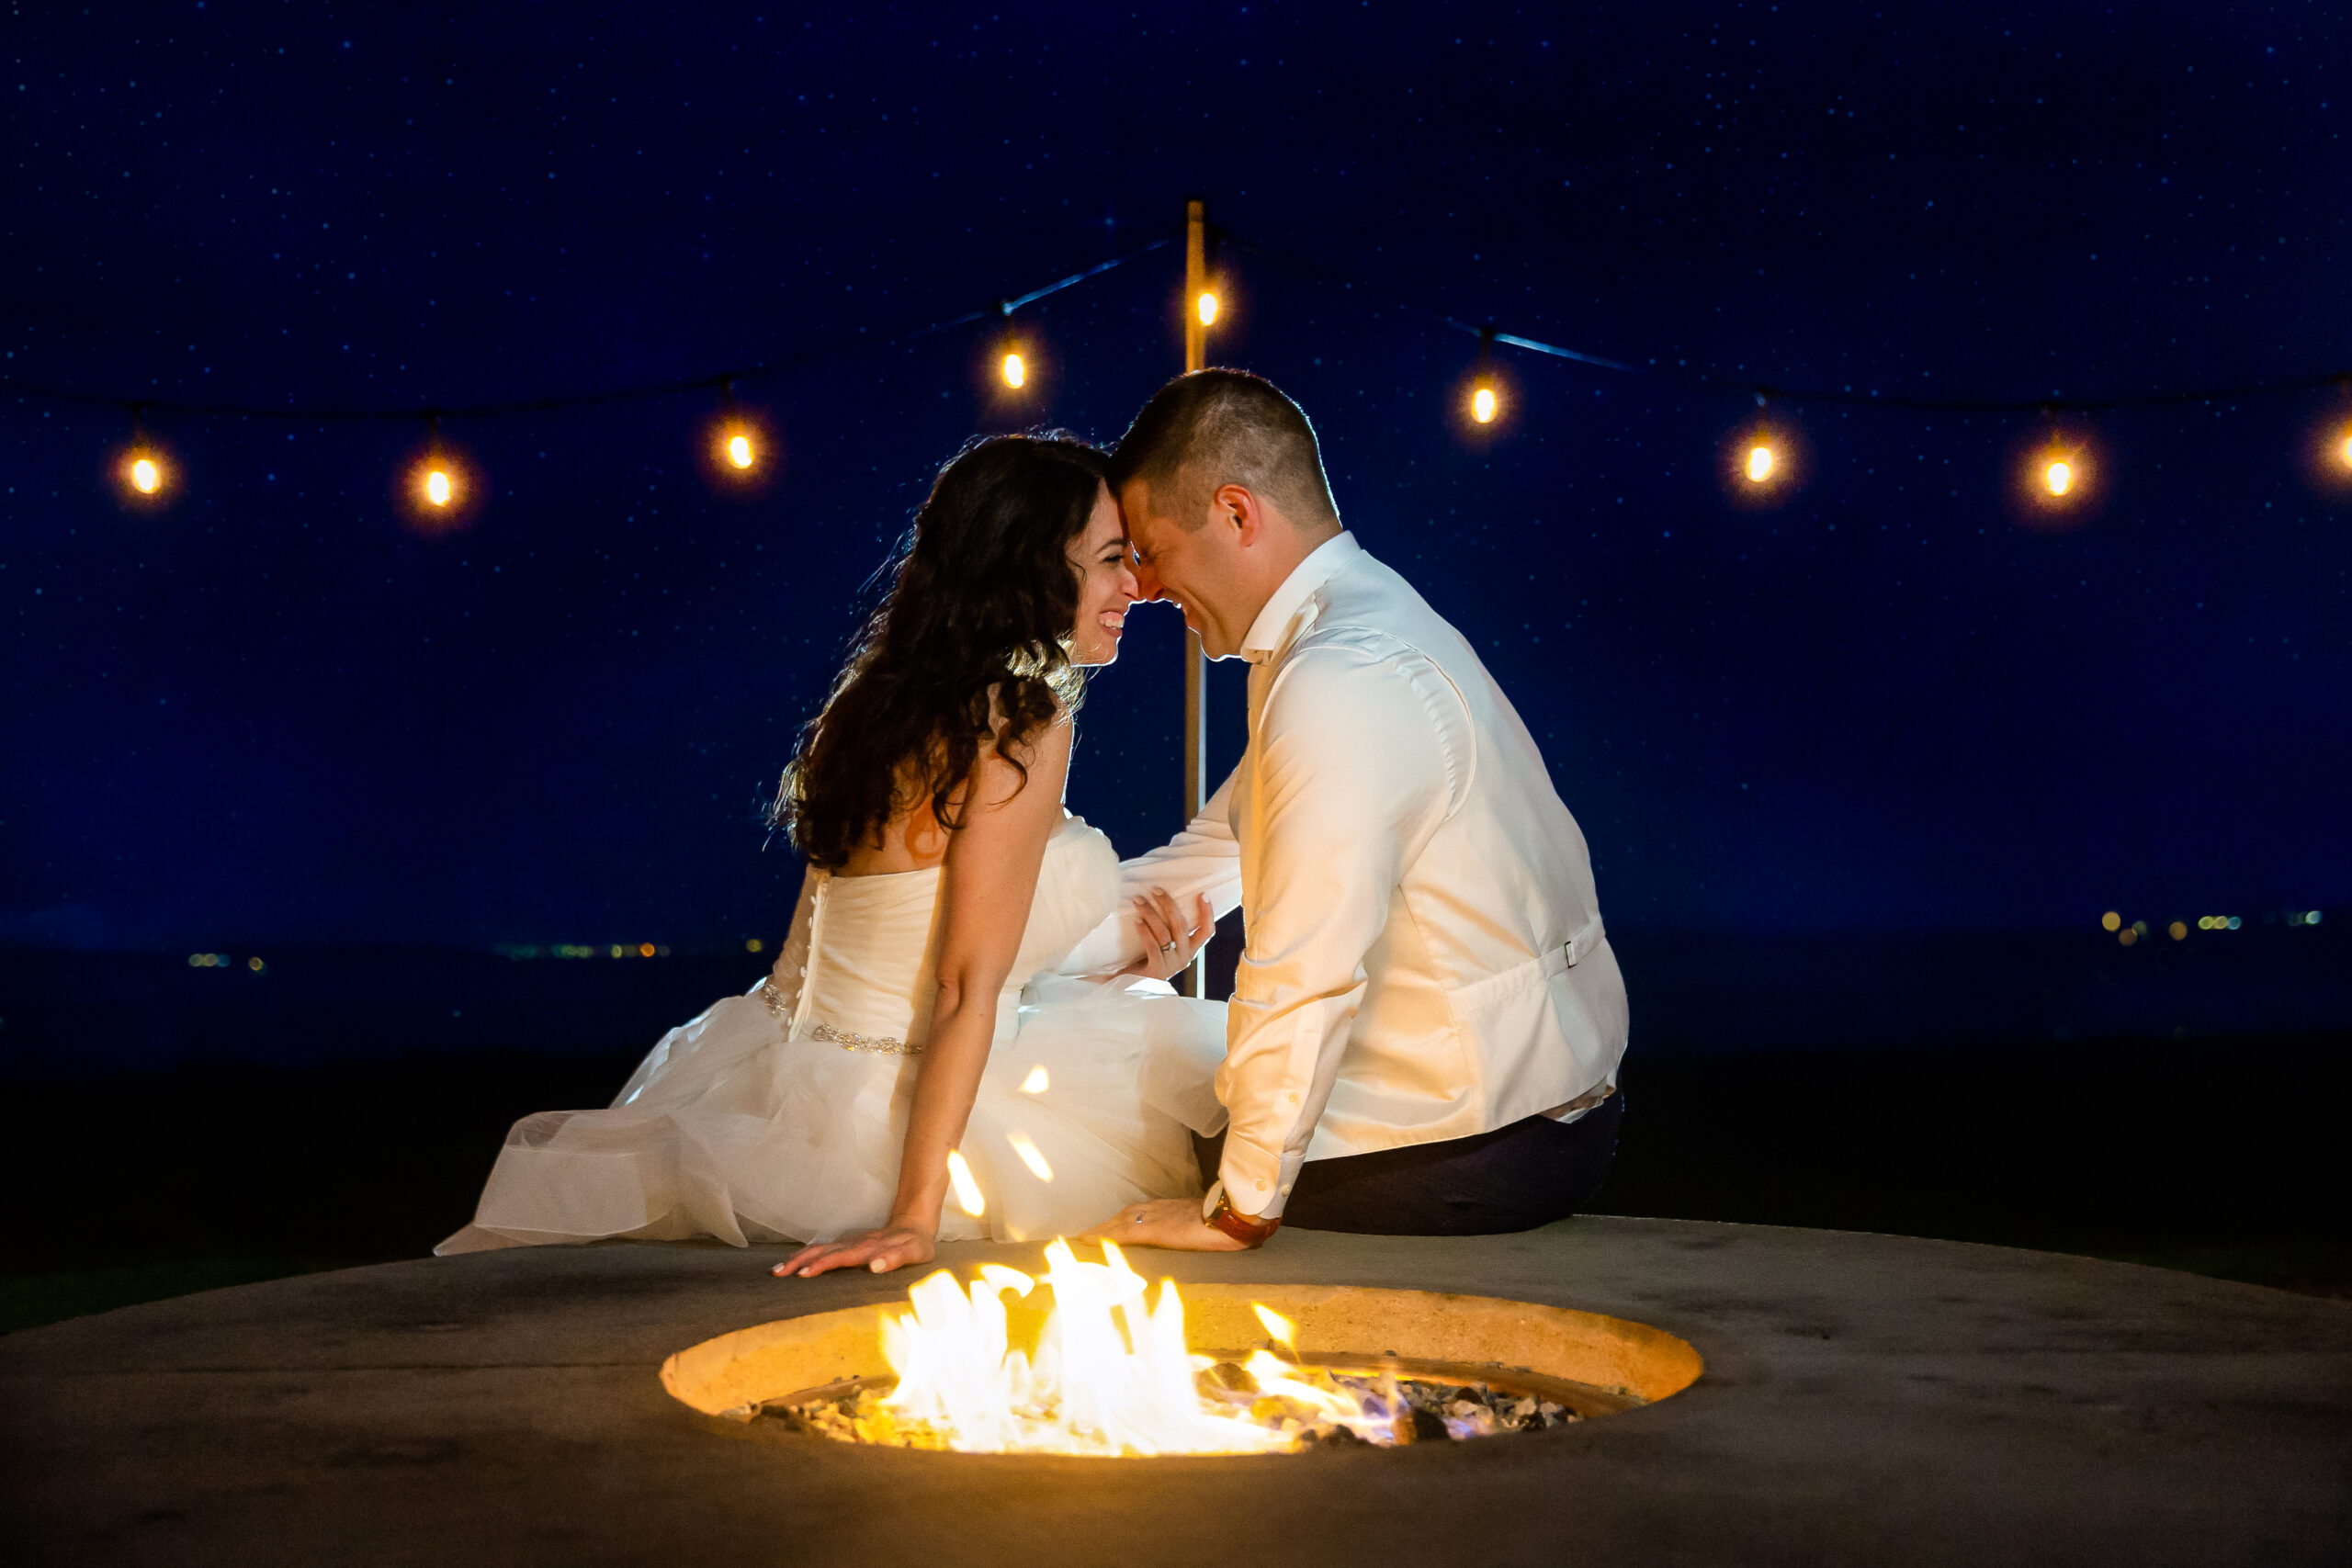 The fire pit at Warwick Country Club provides an opportunity for a stunning night shot.